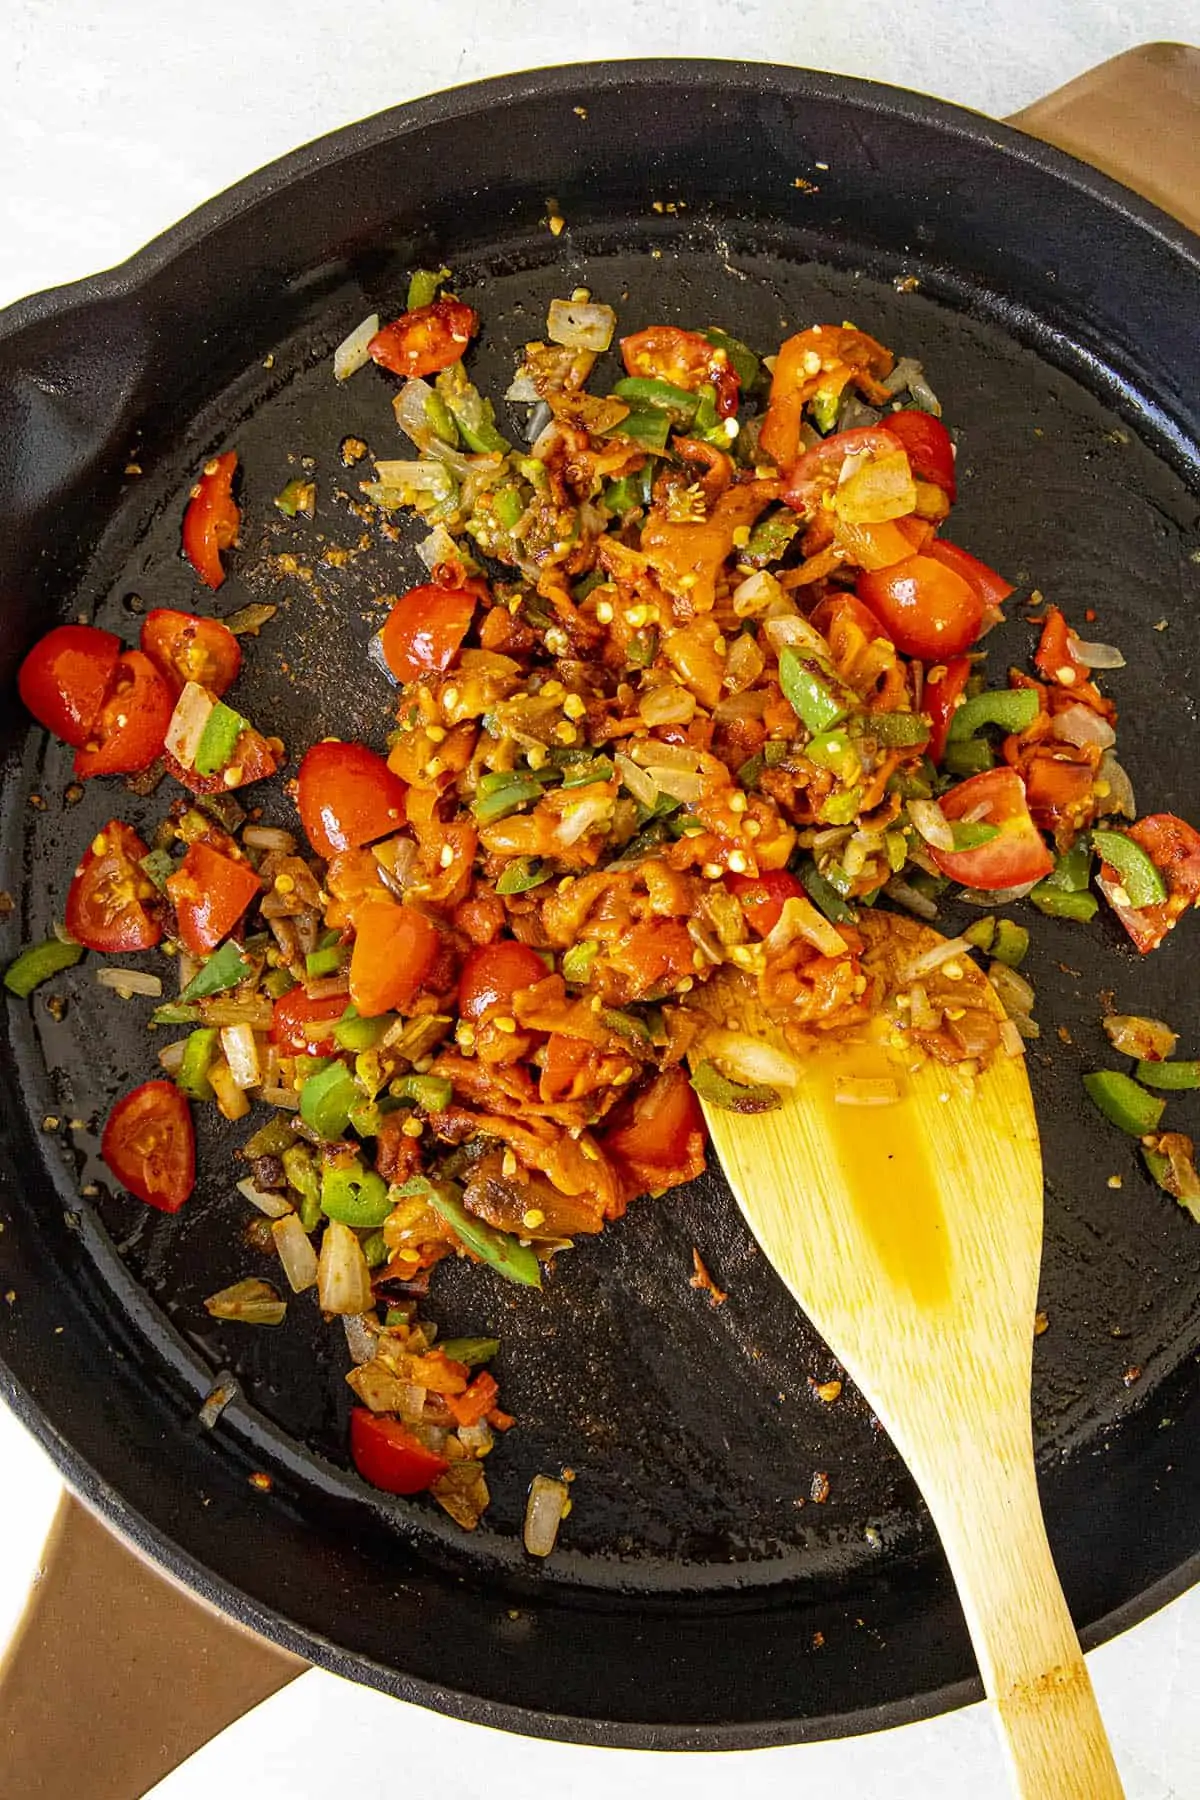 Cooking peppers, onions and tomatoes in a hot pan